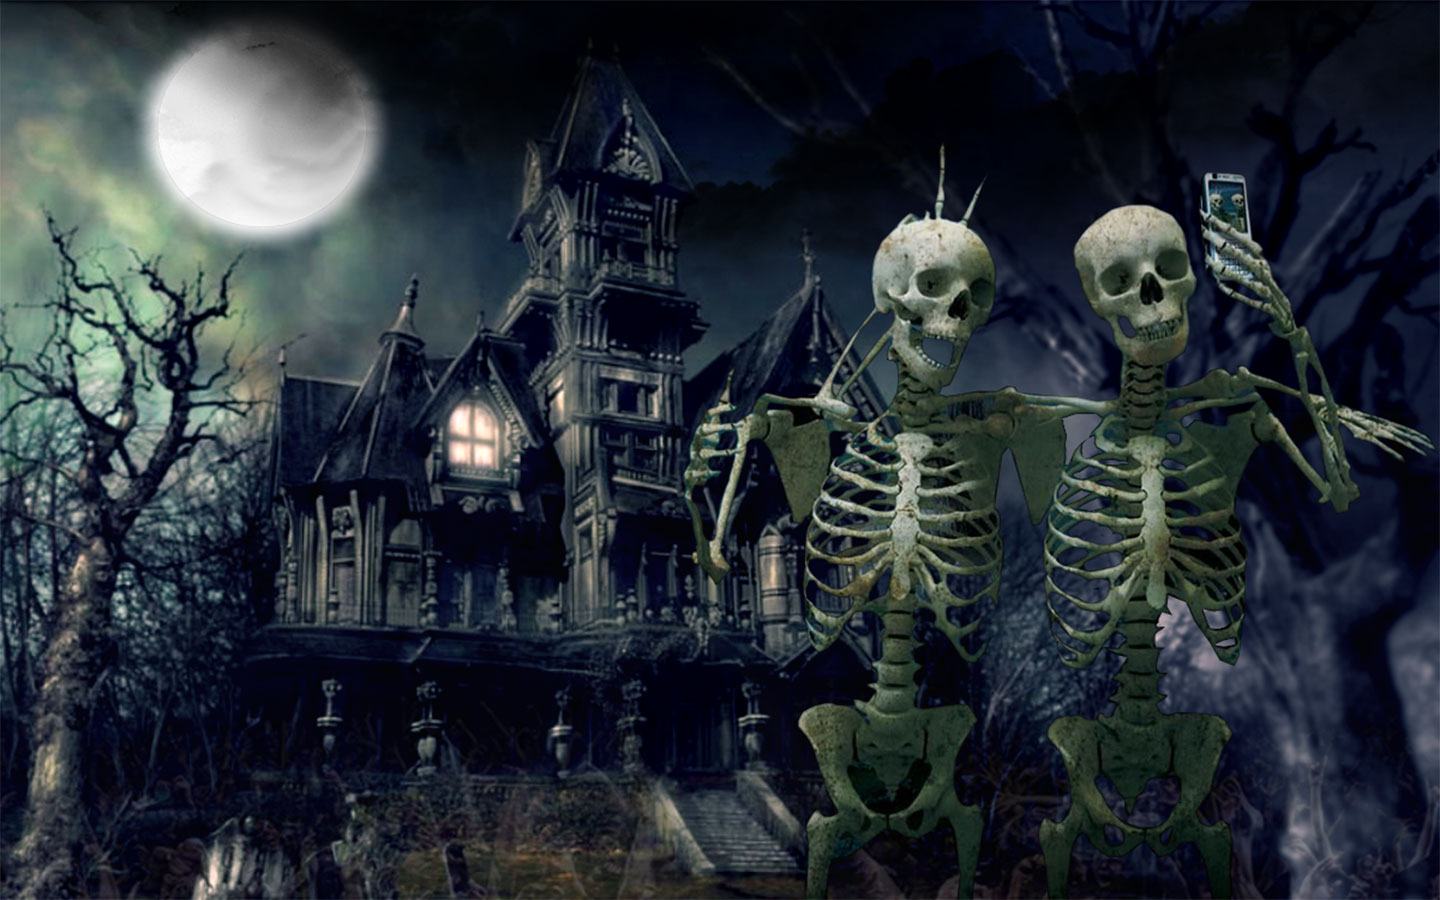  Wallpapers Backgrounds   Haunted House Skeletons wallpaper